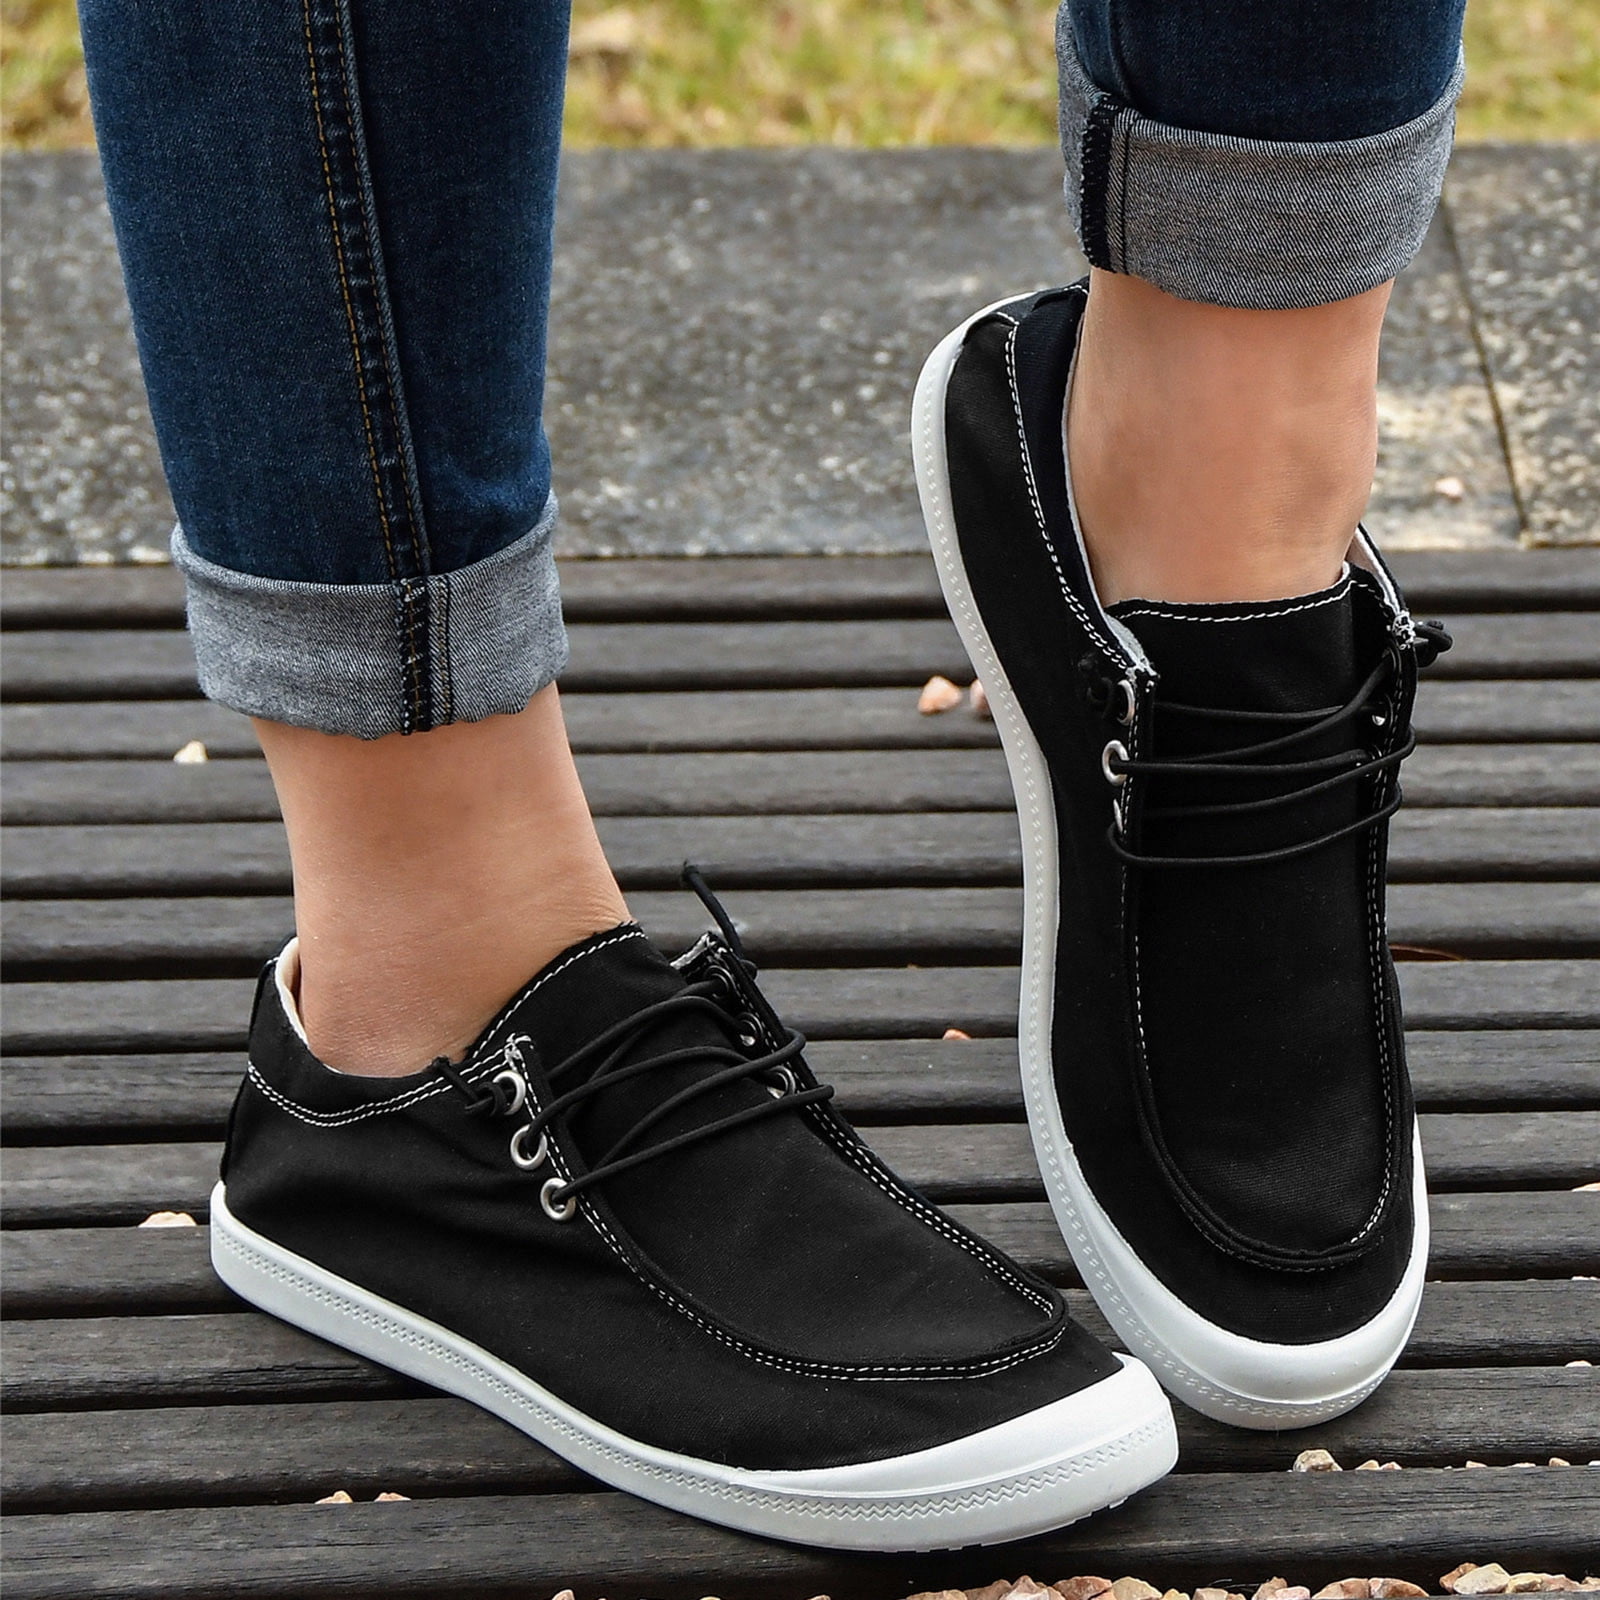 FZM Womens Shoes Women Soft Sole Massage Flat Sneakers Fashion Casual Lace  Up Casual Shoes Soft Sole Sneakers Black 10 